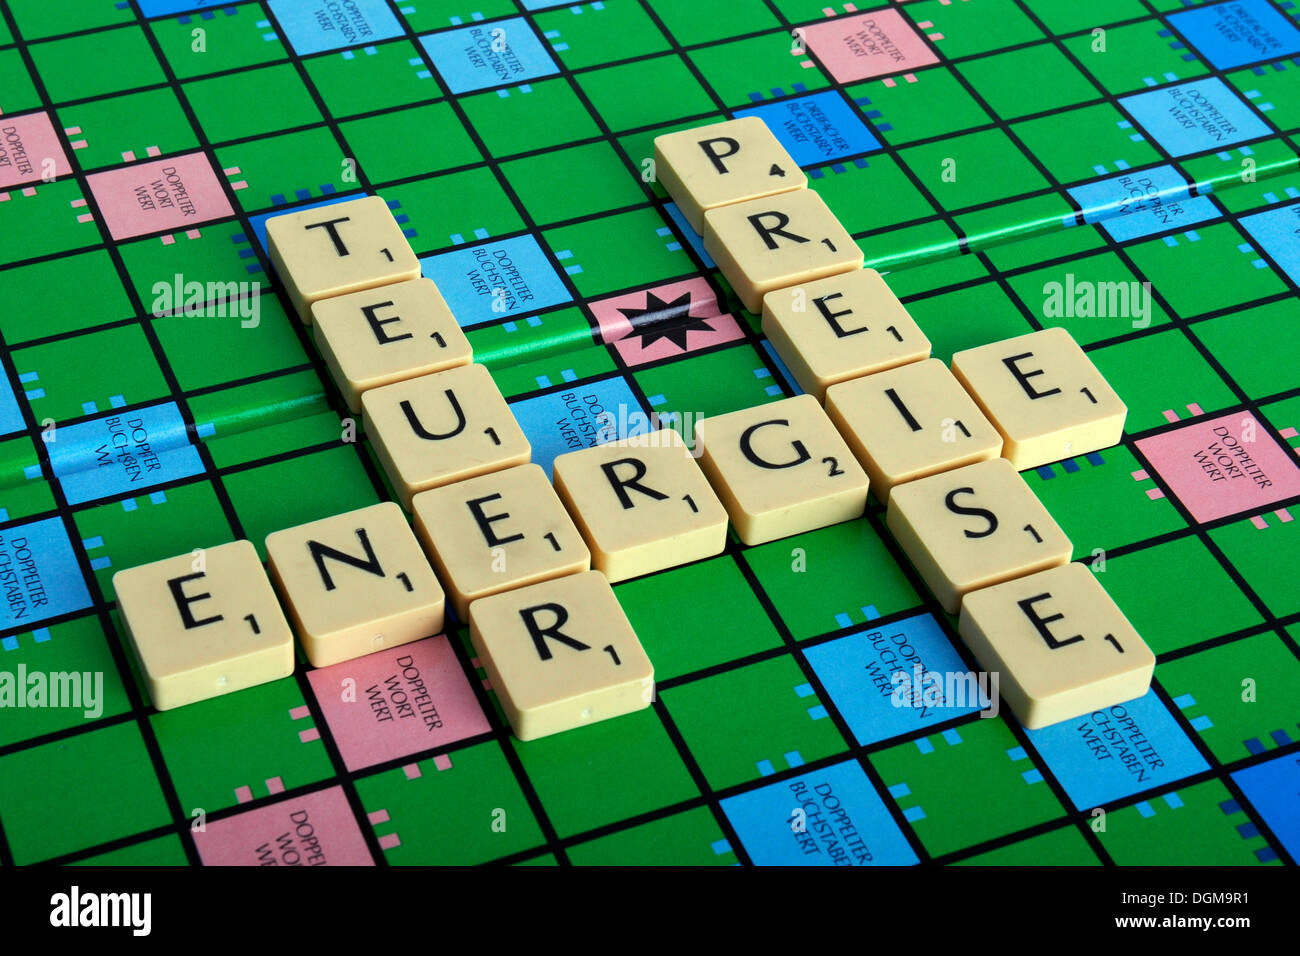 Scrabble letters forming the words teure, Energie and Preise, German for expensive energy prices Stock Photo